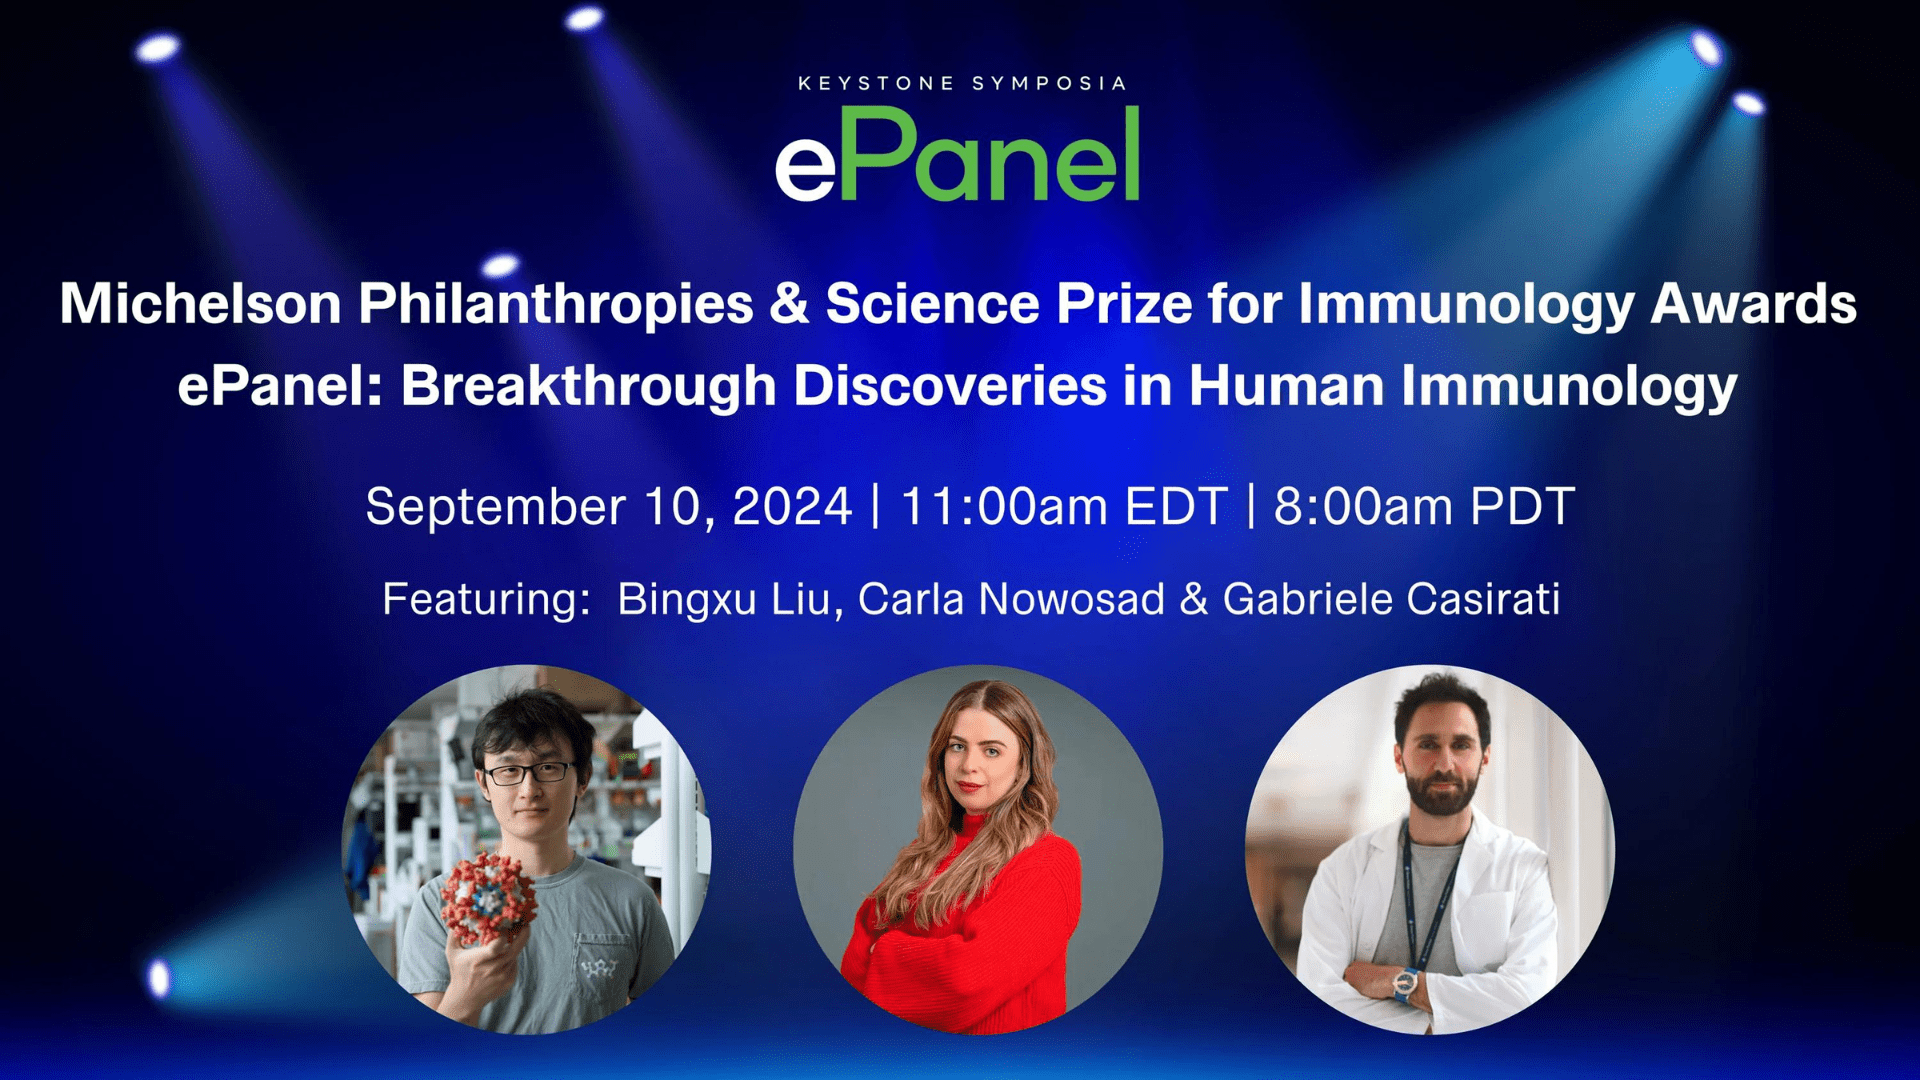 Michelson Philanthropies & Science Prize For Immunology Awards ePanel | September 10, 2024